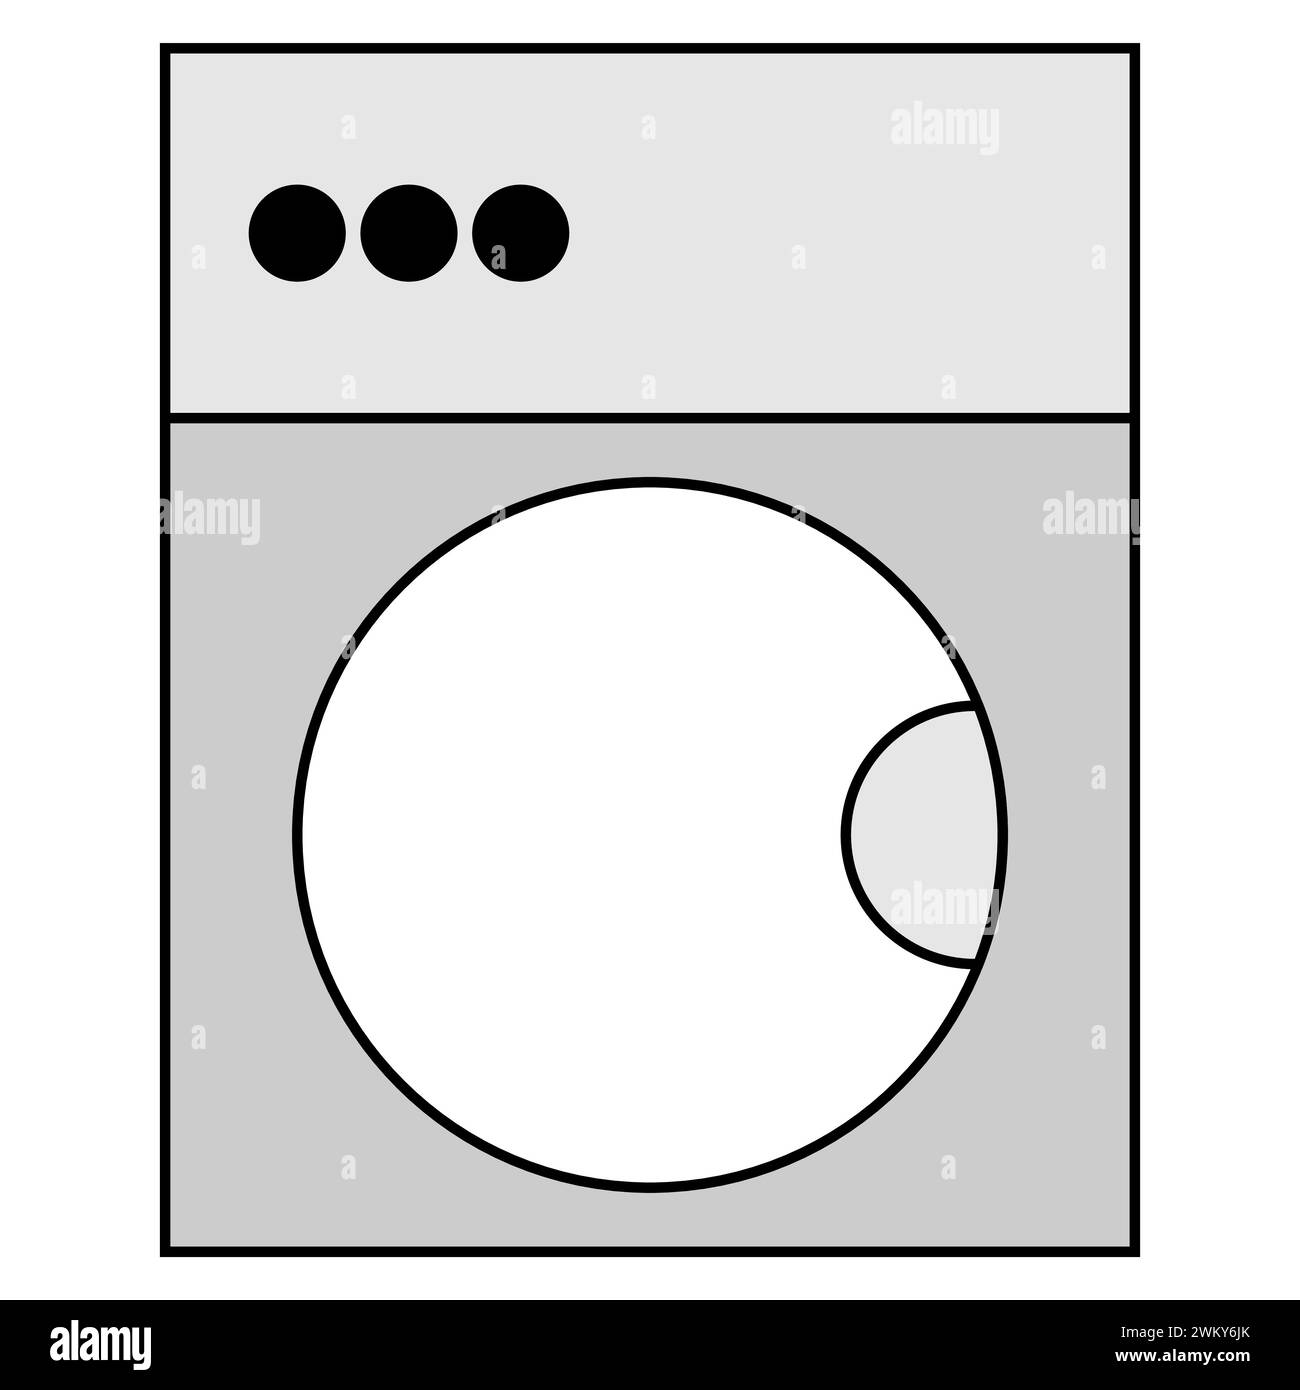 Washing machine icon vector illustration. Electric appliances icon line style. Home symbol. Flat sign on white background. Stock Vector